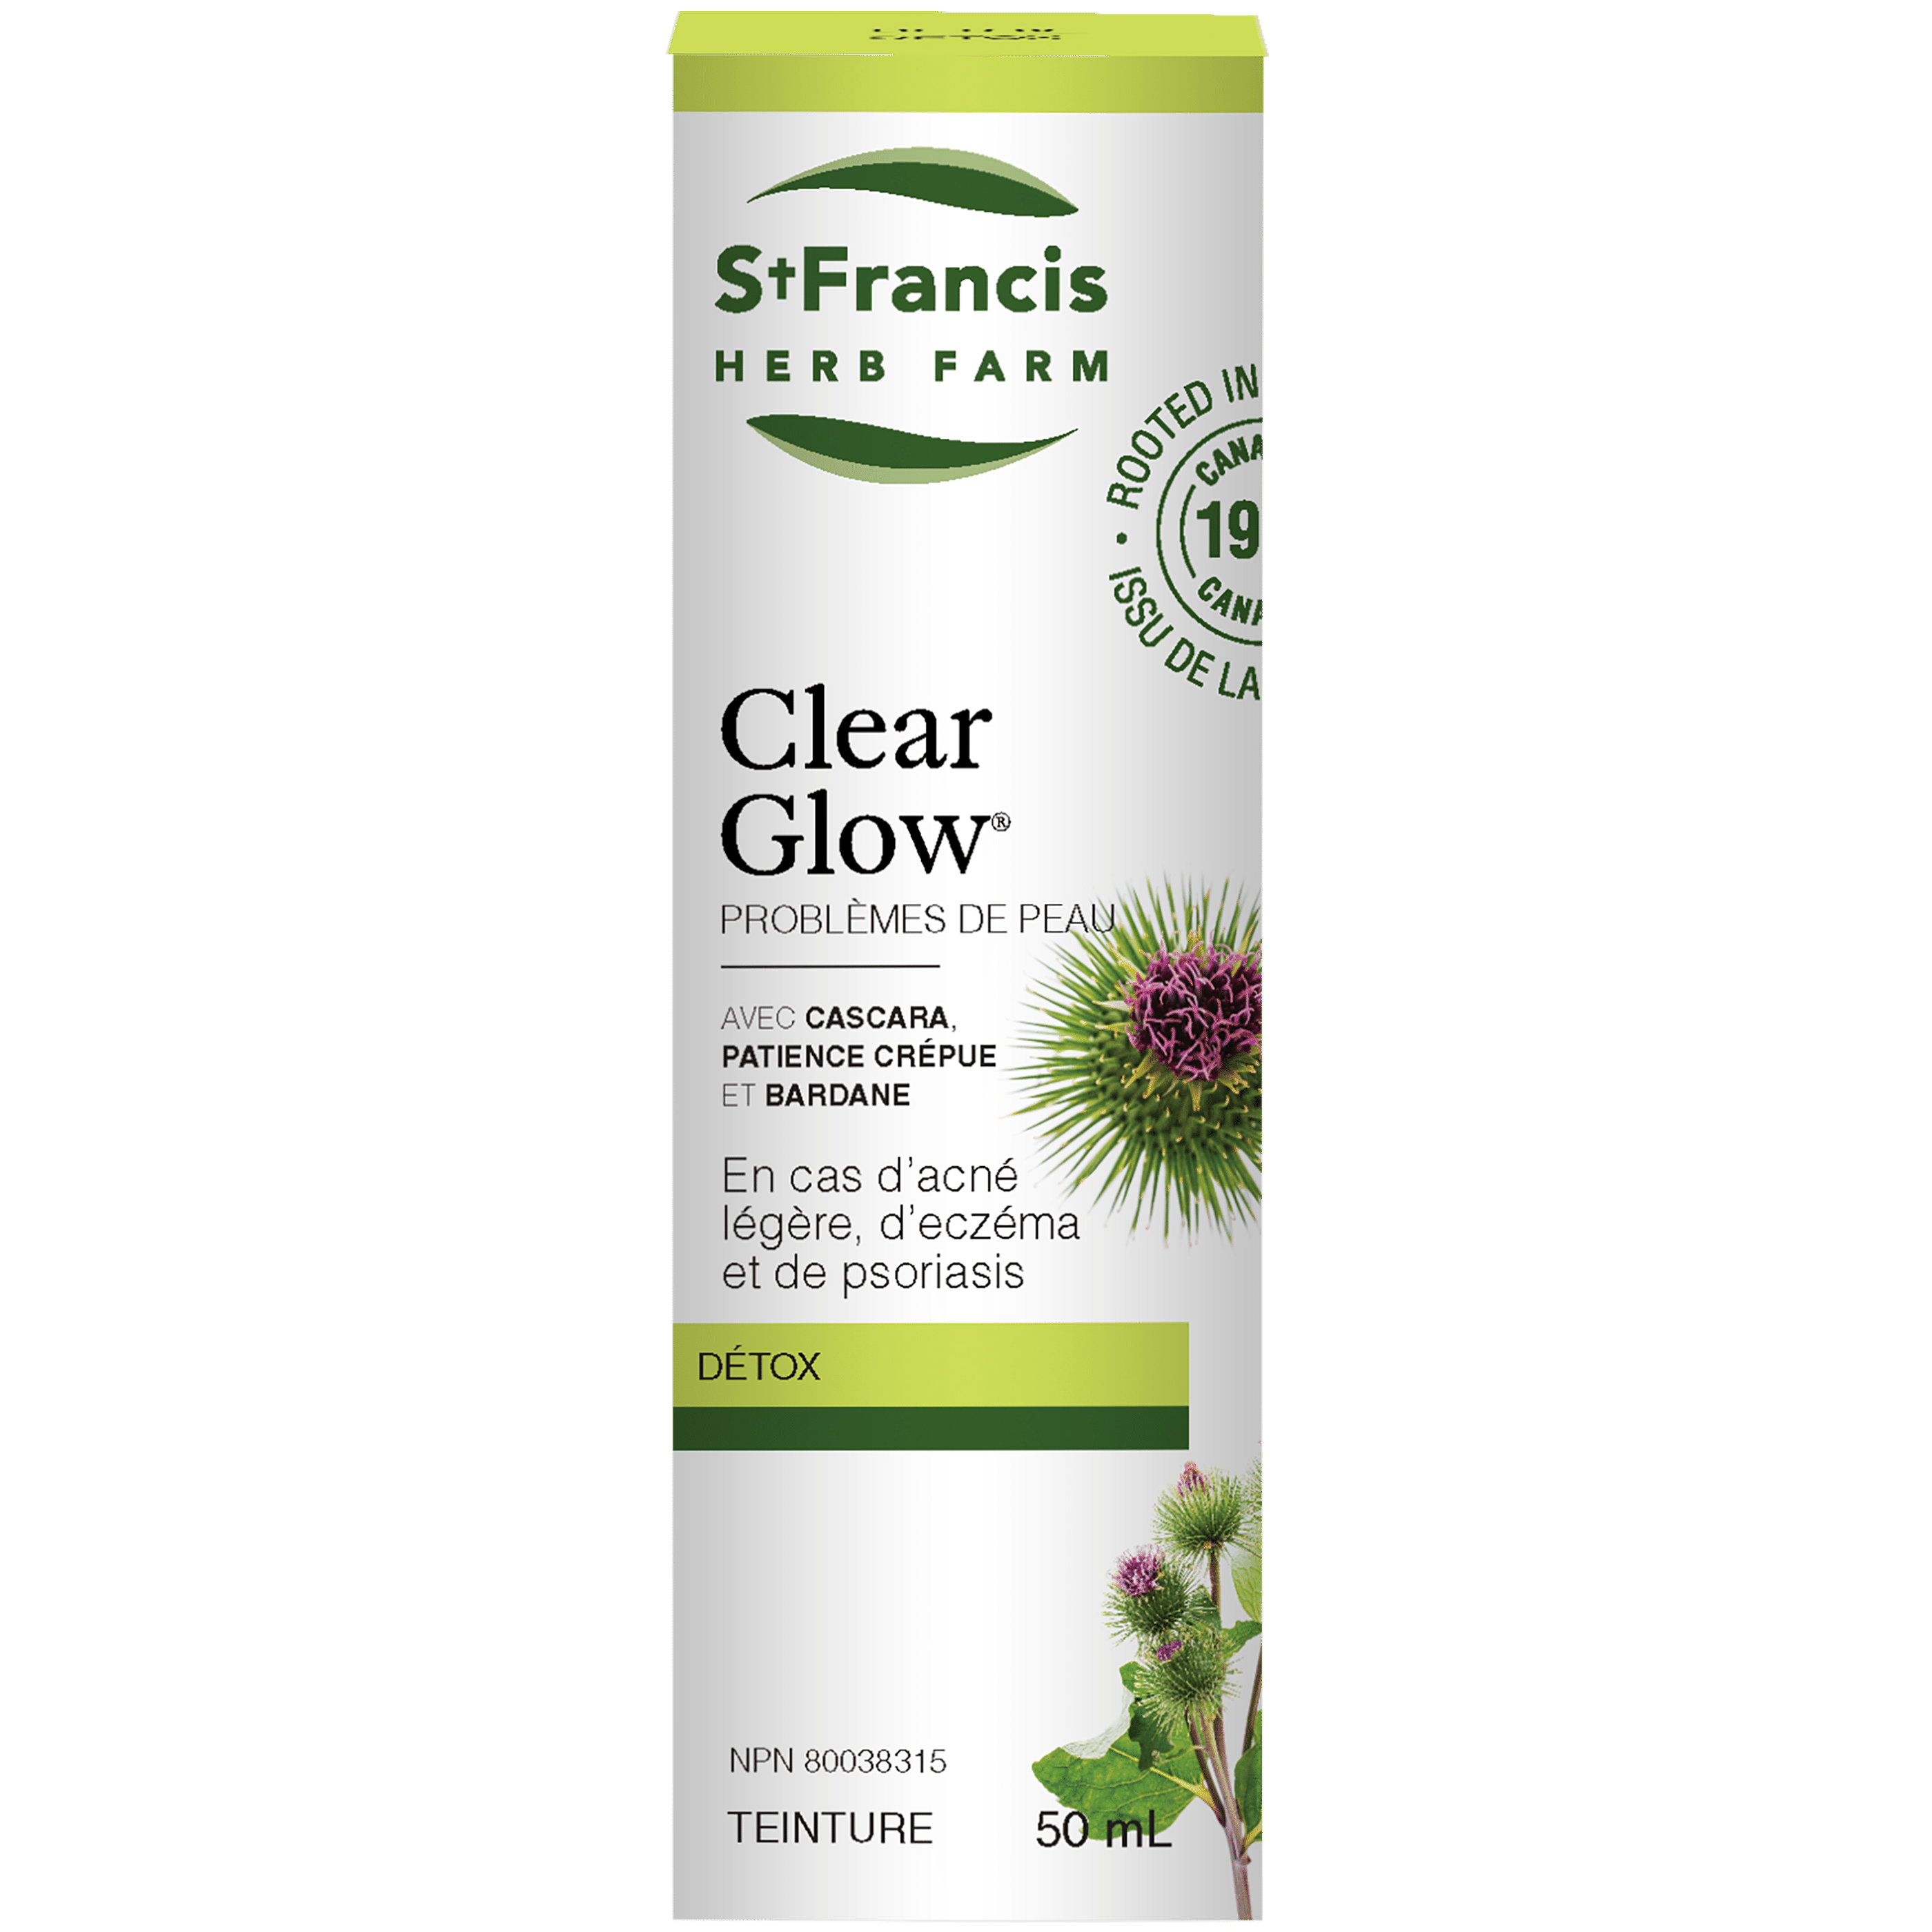 ST-FRANCIS HERB FARM Suppléments Clearglow 50ml